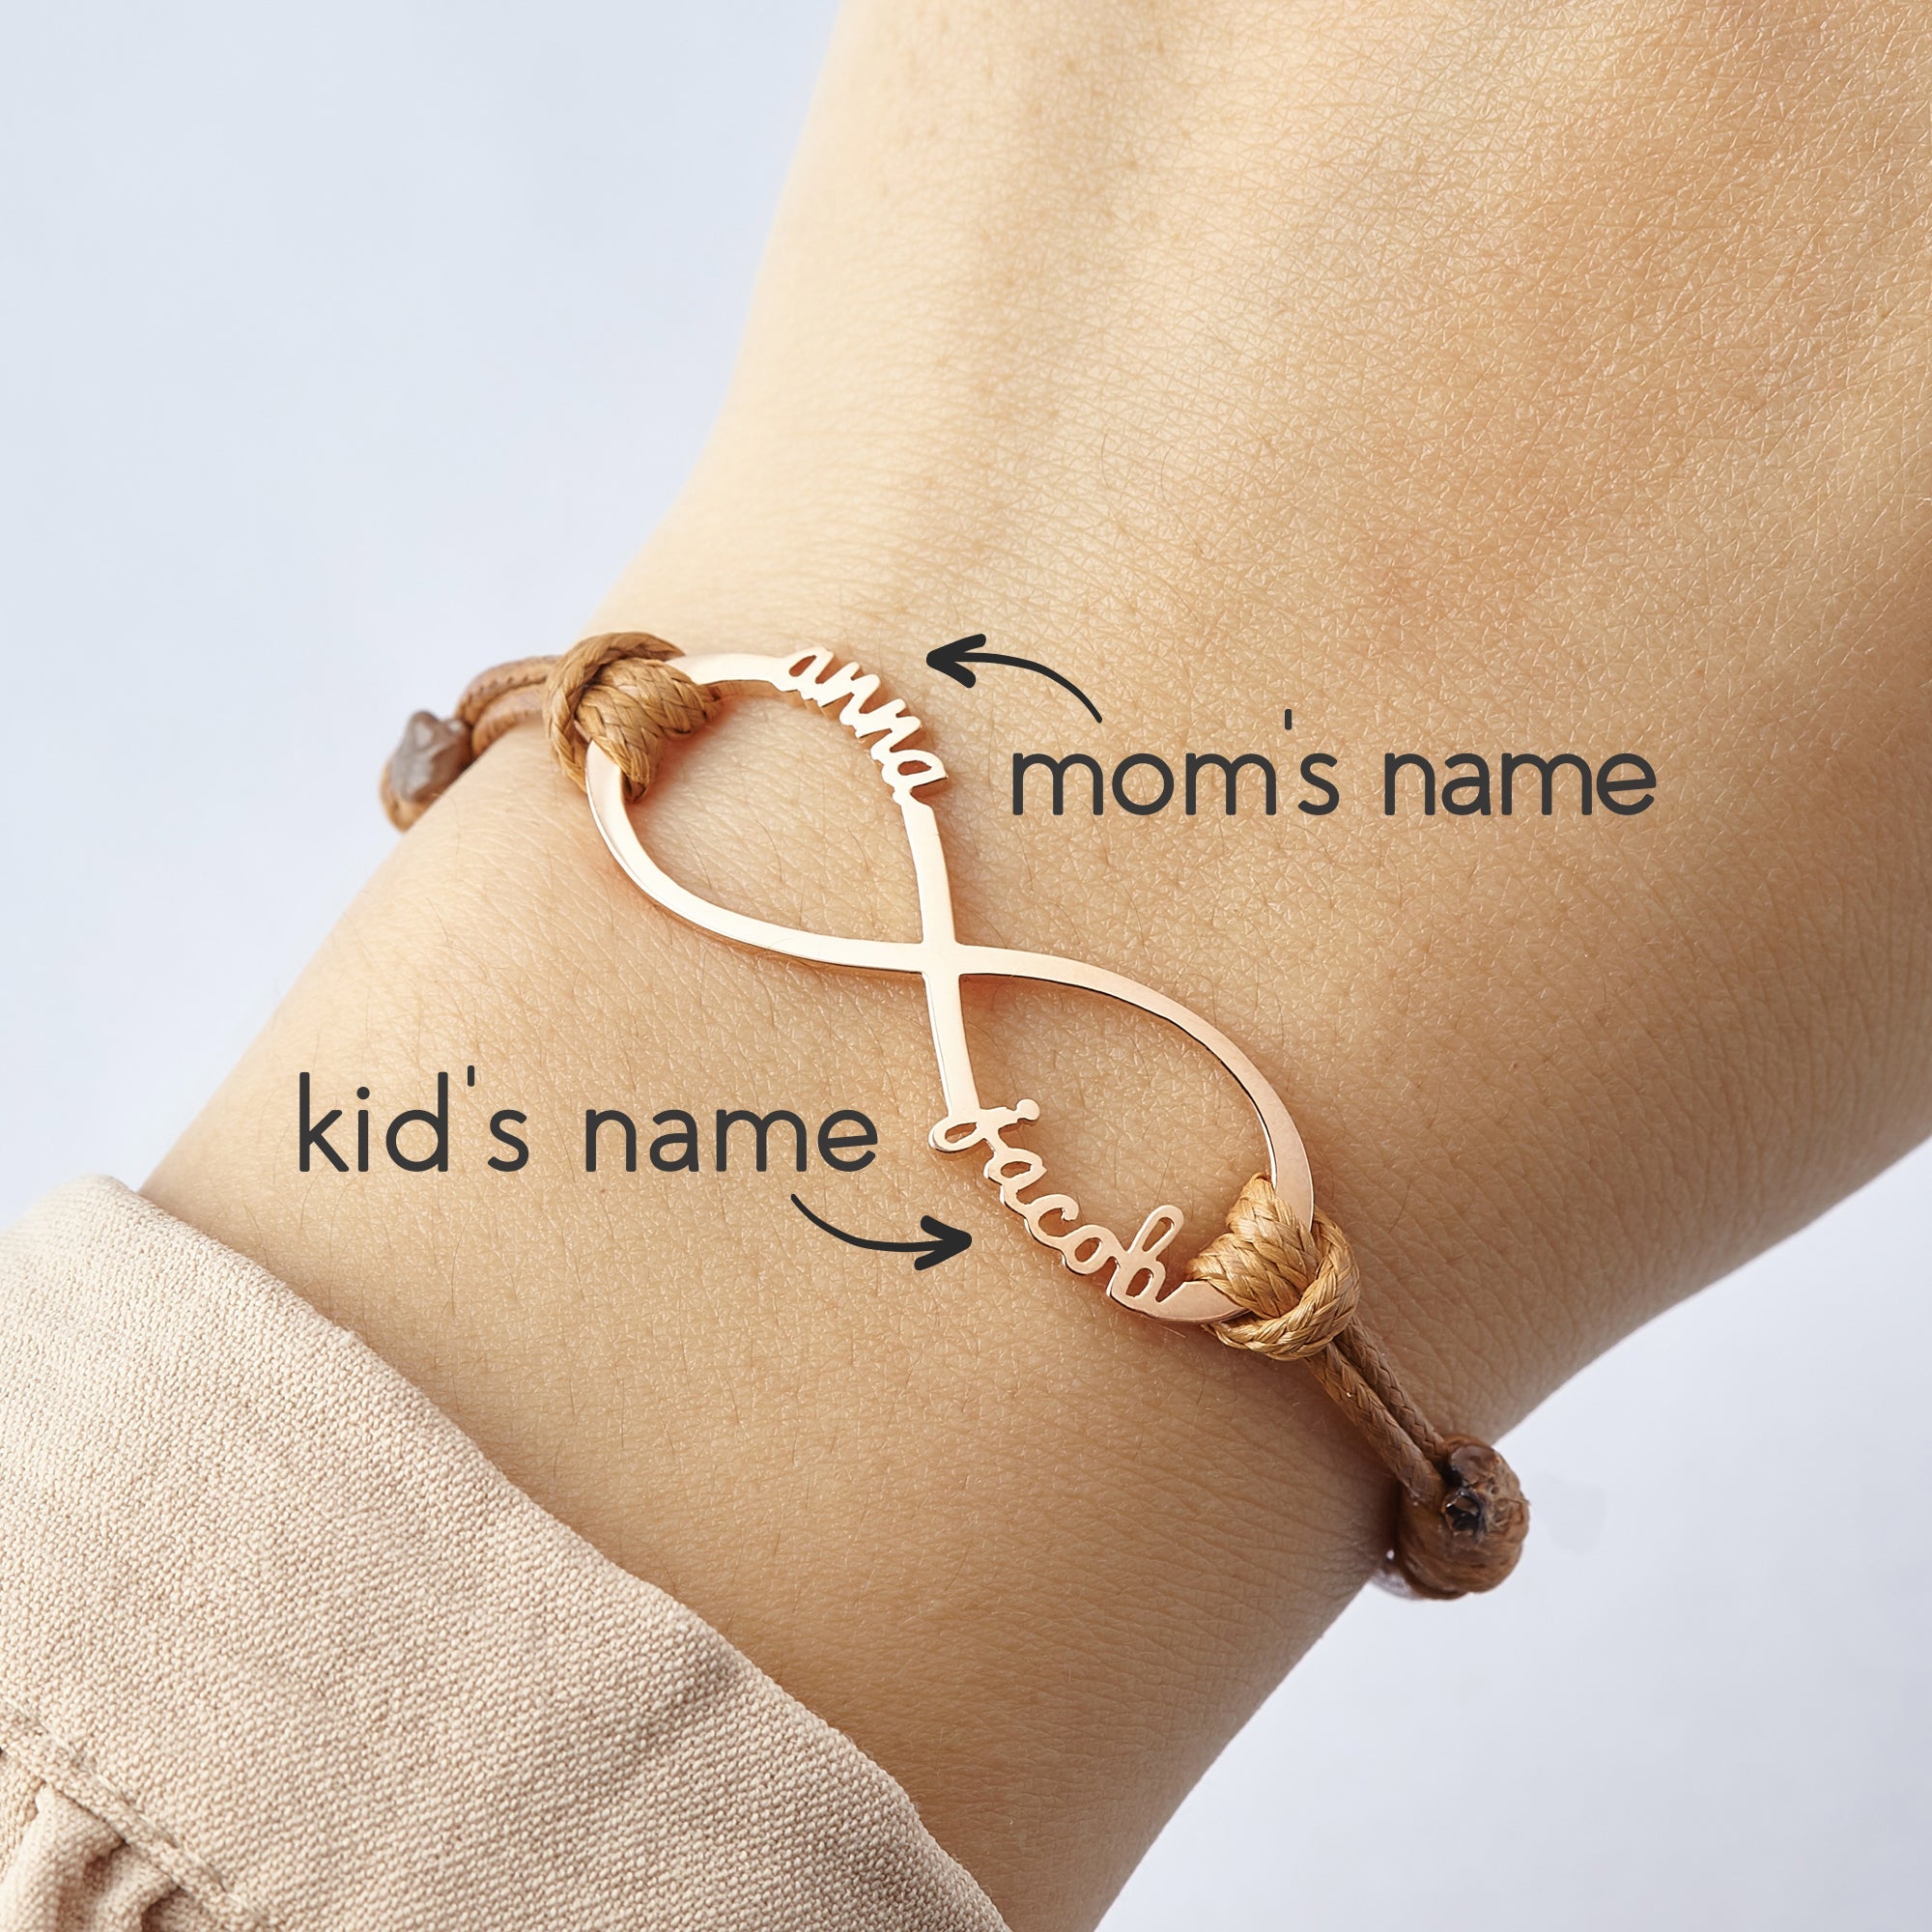 Mom Birthday Gifts - Mother's Necklace with Engraved Children Charms - Rose Gold Plated - Mom Necklace with Kid's Names